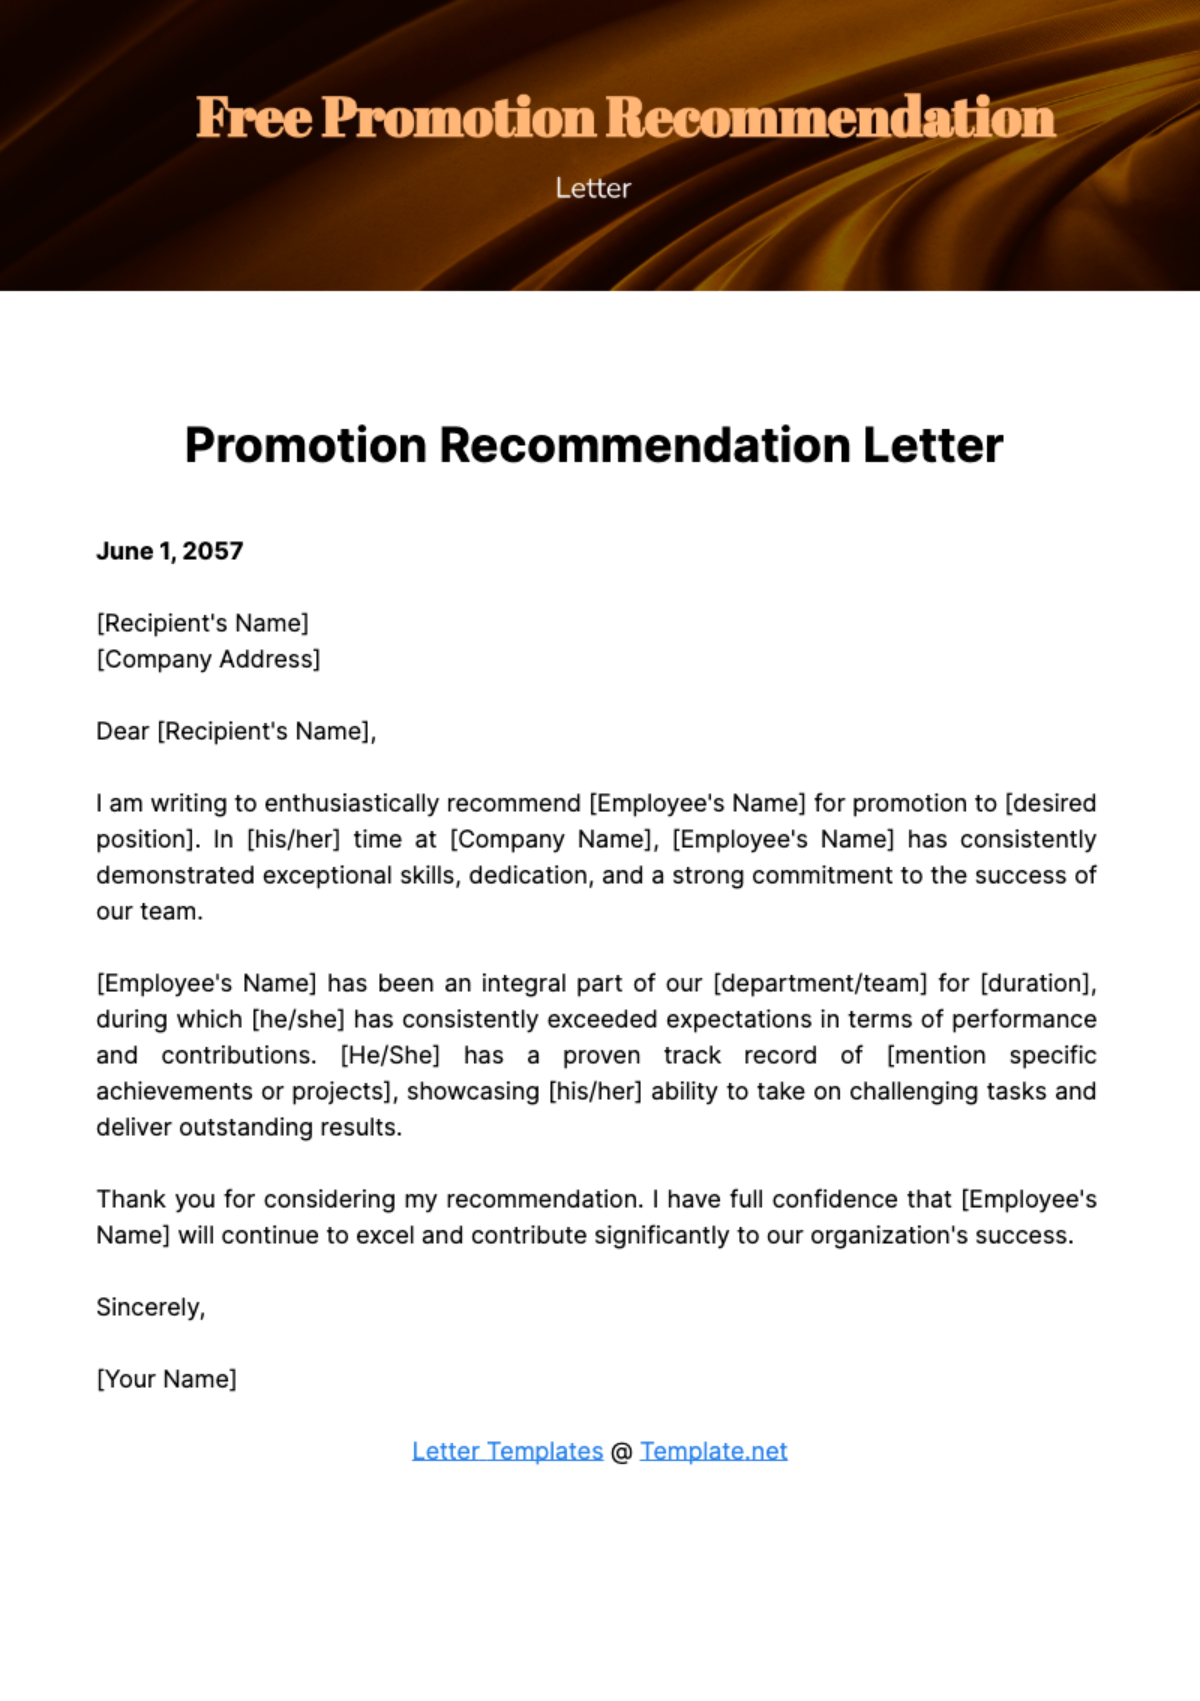 Promotion Recommendation Letter Template